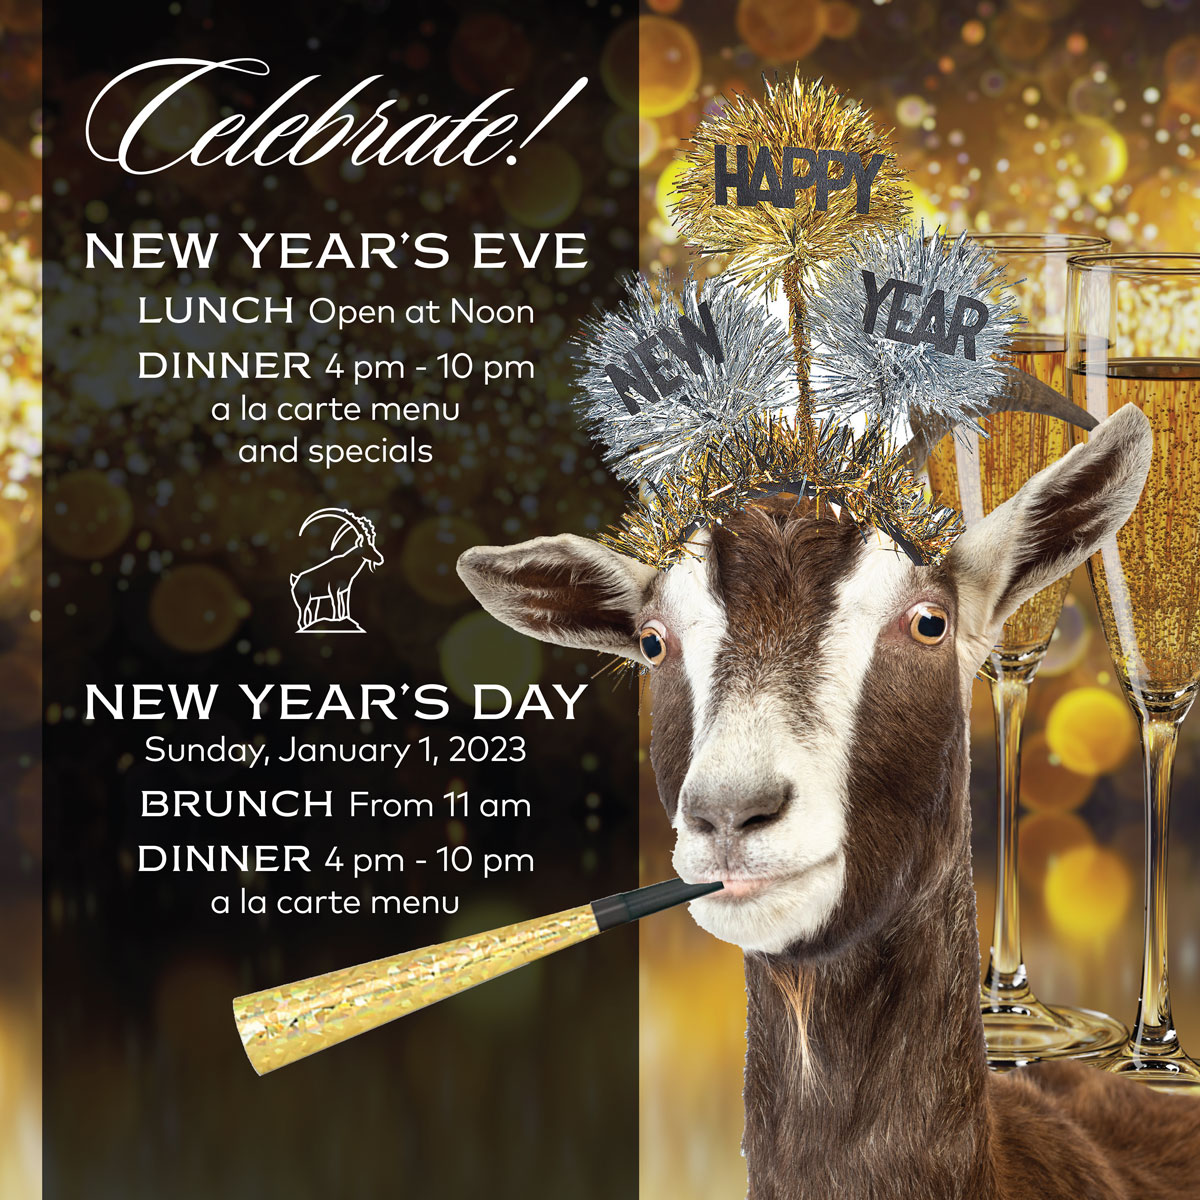 The Goat by David Burke New Year's Eve